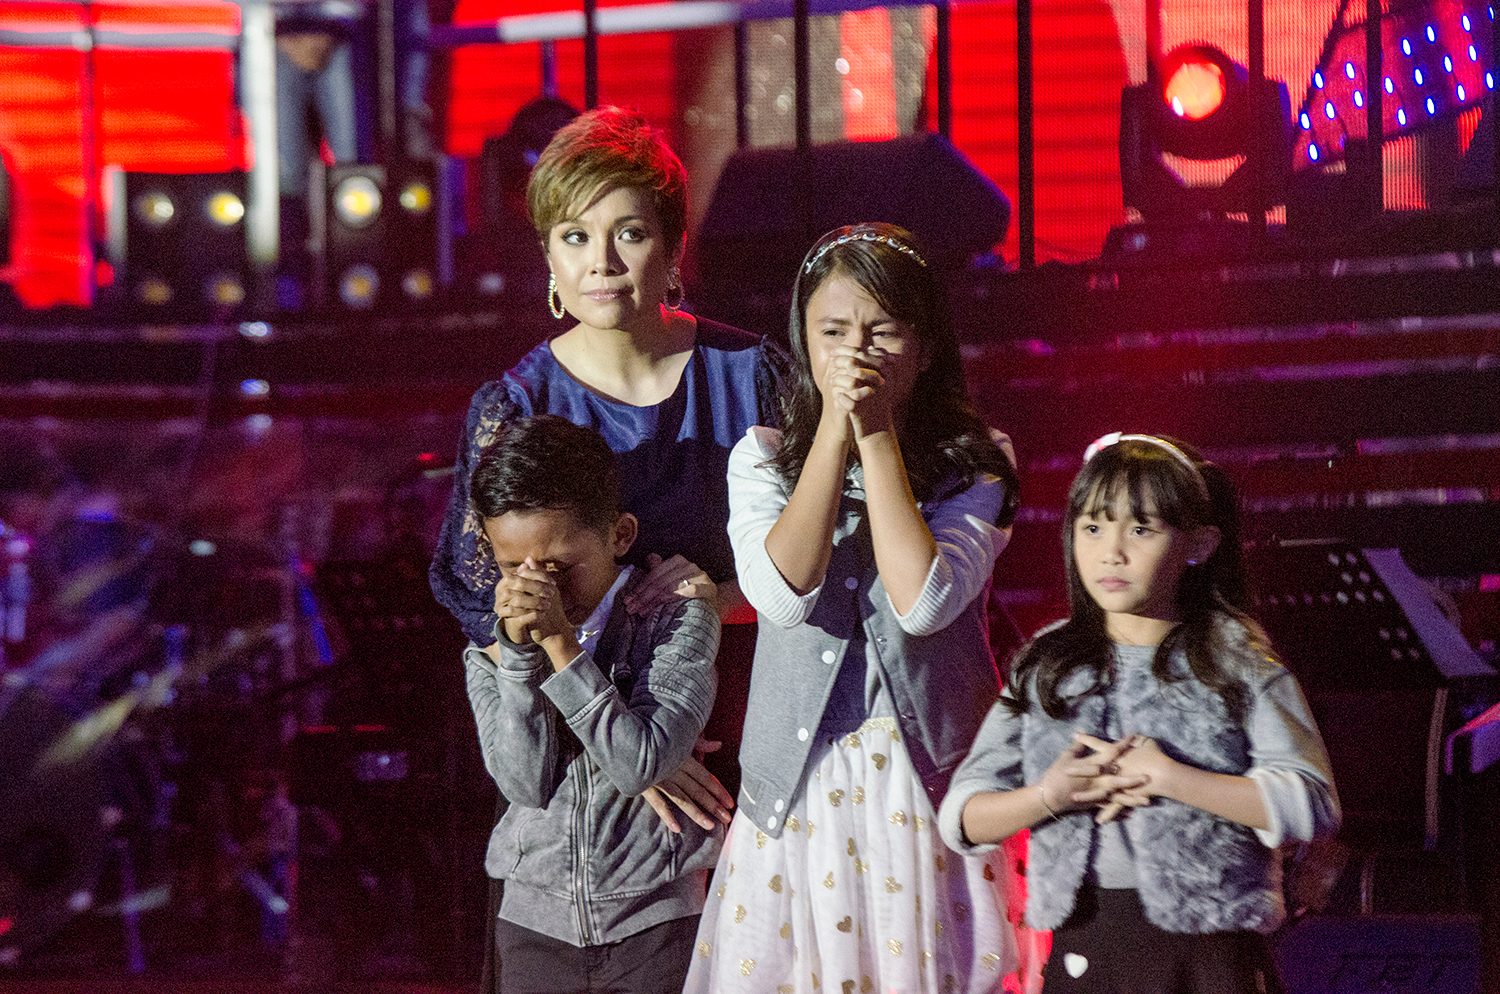 IN PHOTOS: Emotional ‘Voice Kids PH’ Top 3 reveal